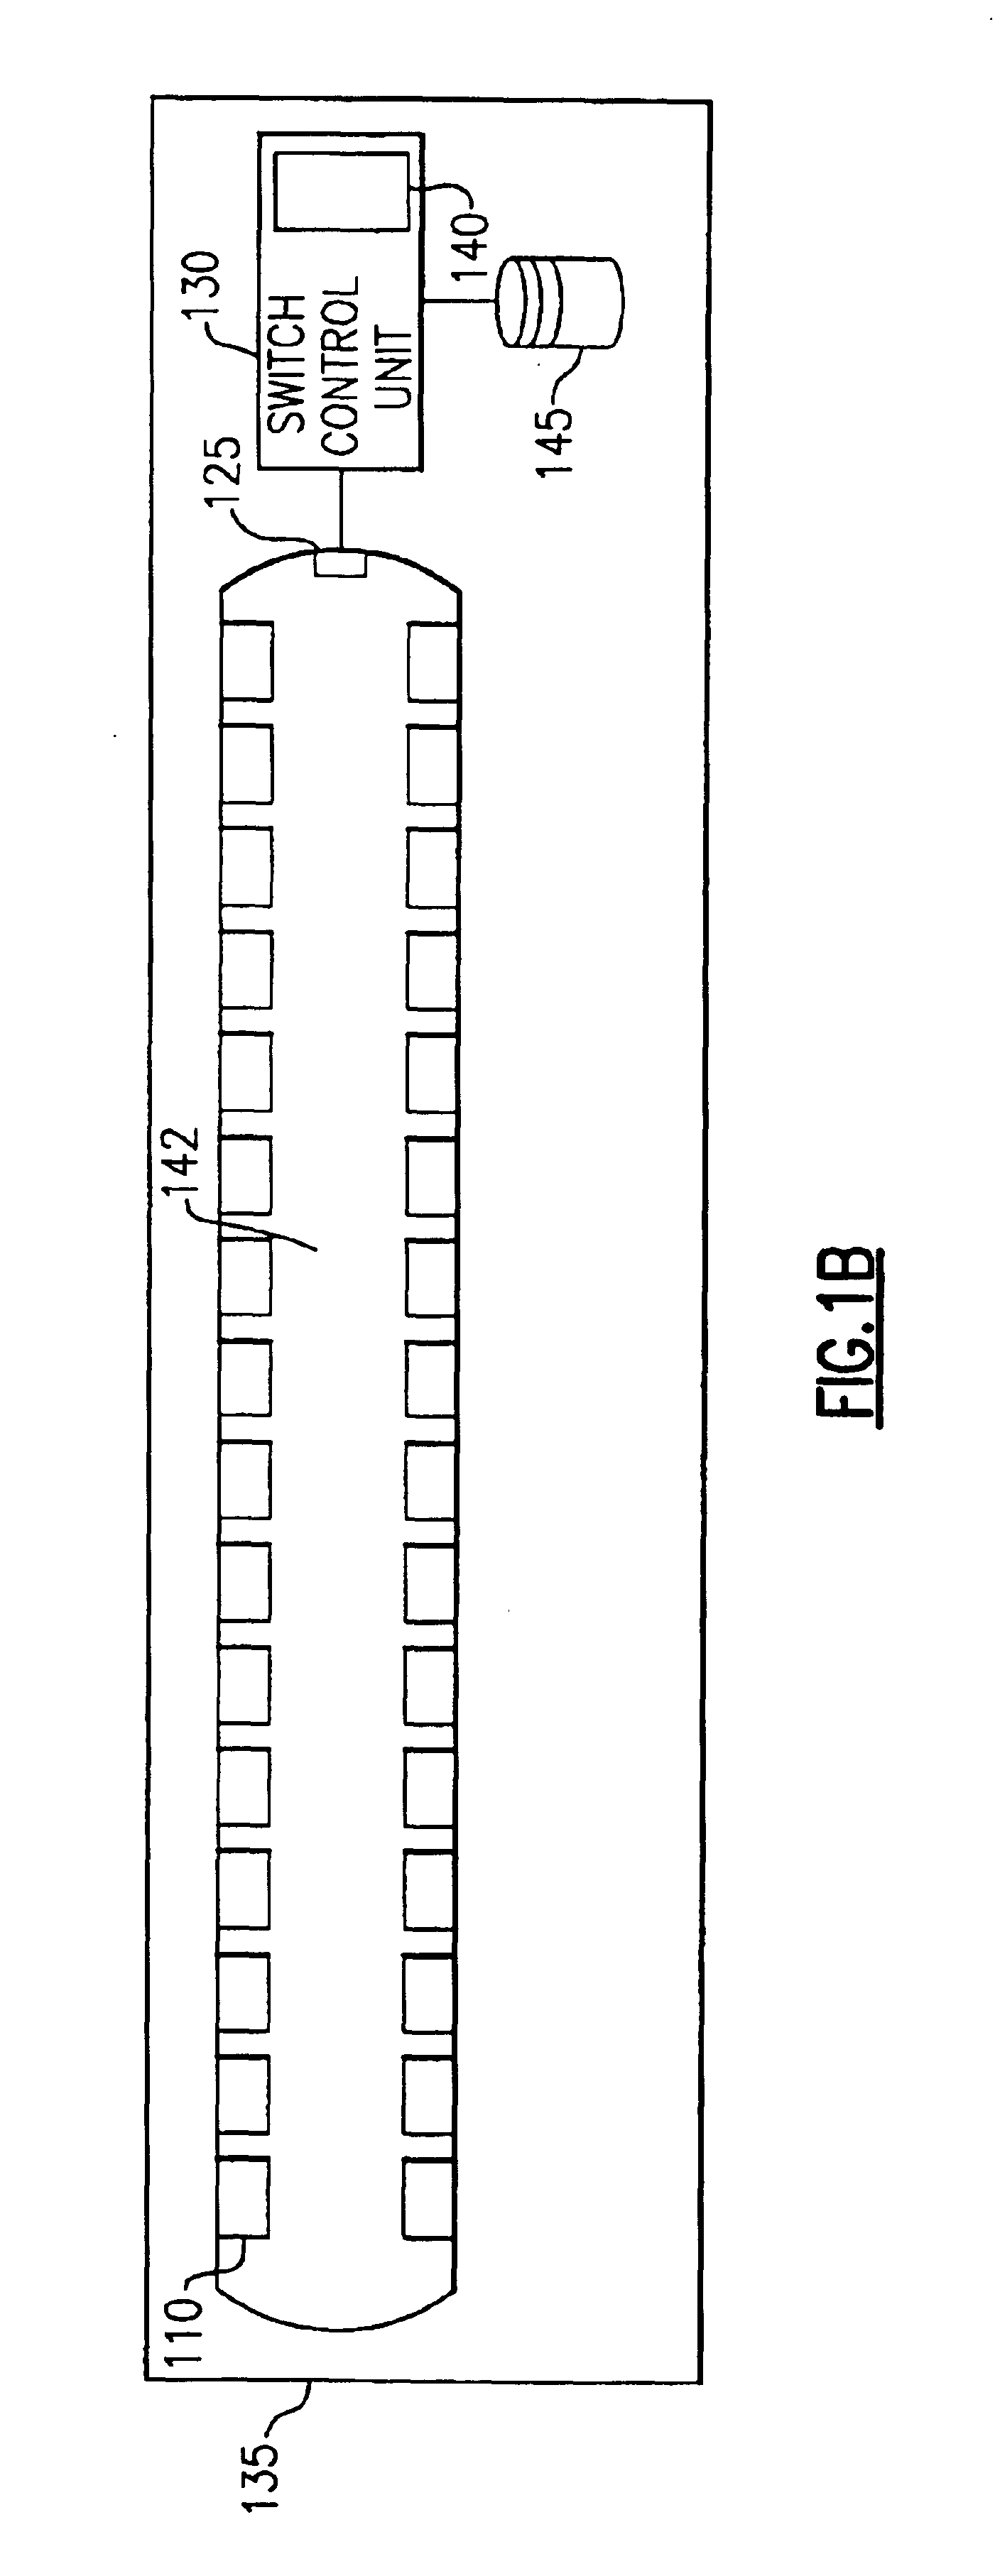 Method, apparatus and computer program for informing a requesting device of port configuration changes in a computer network switching device